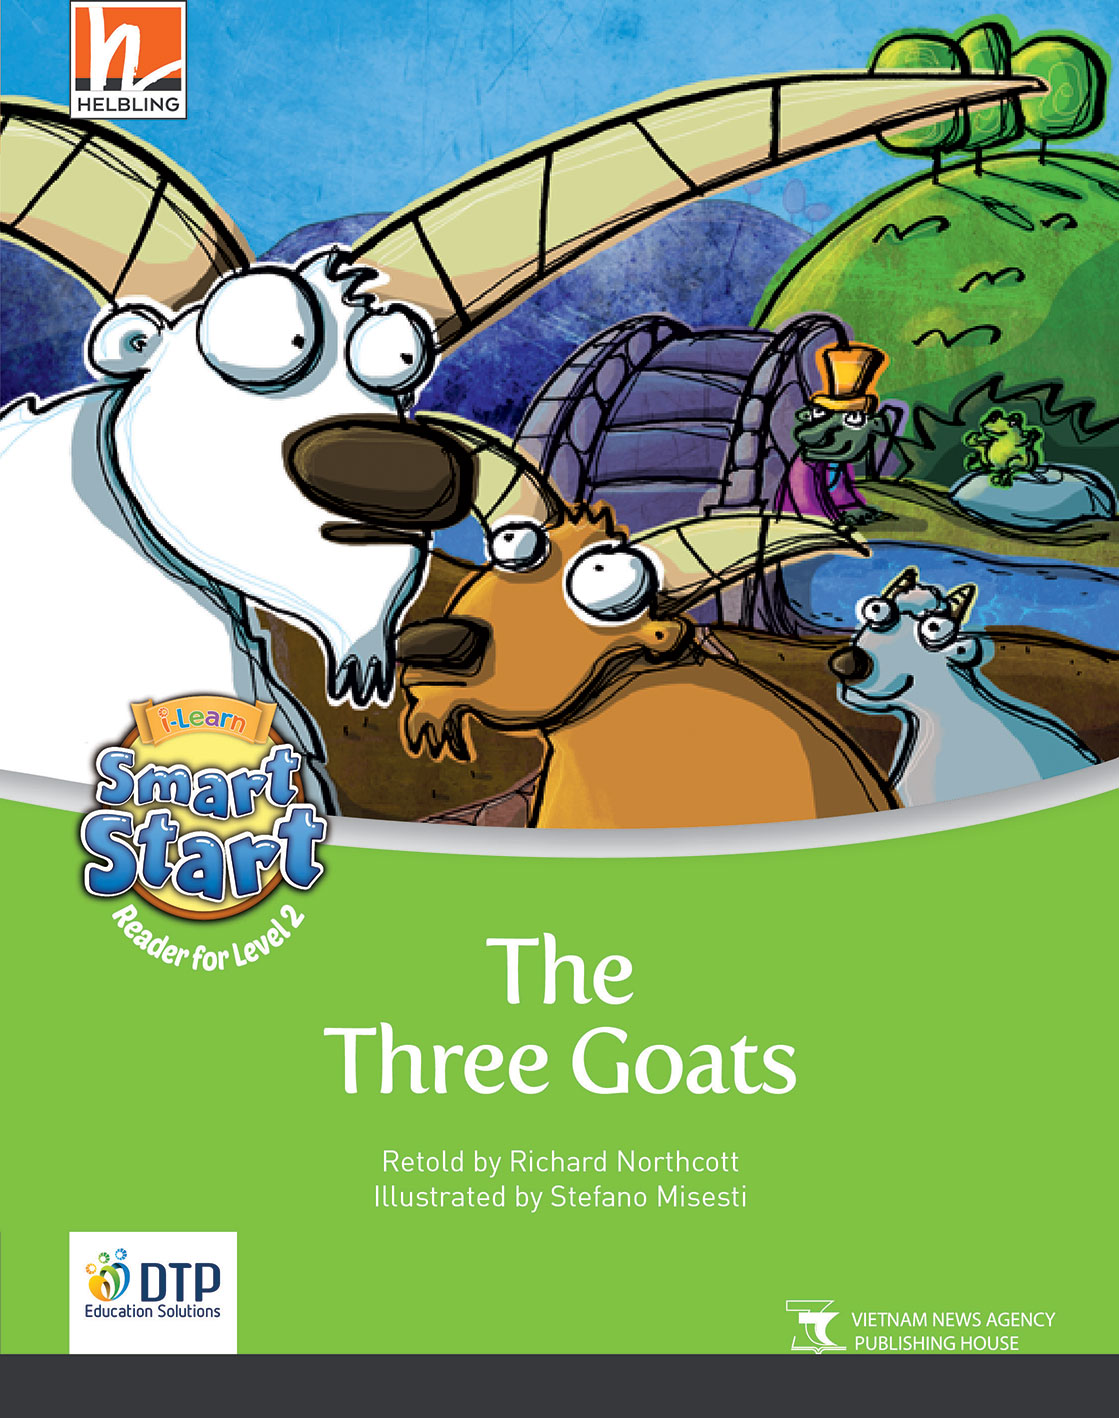 Sách - Dtpbooks - Helbling Young Reader - The Three Goats